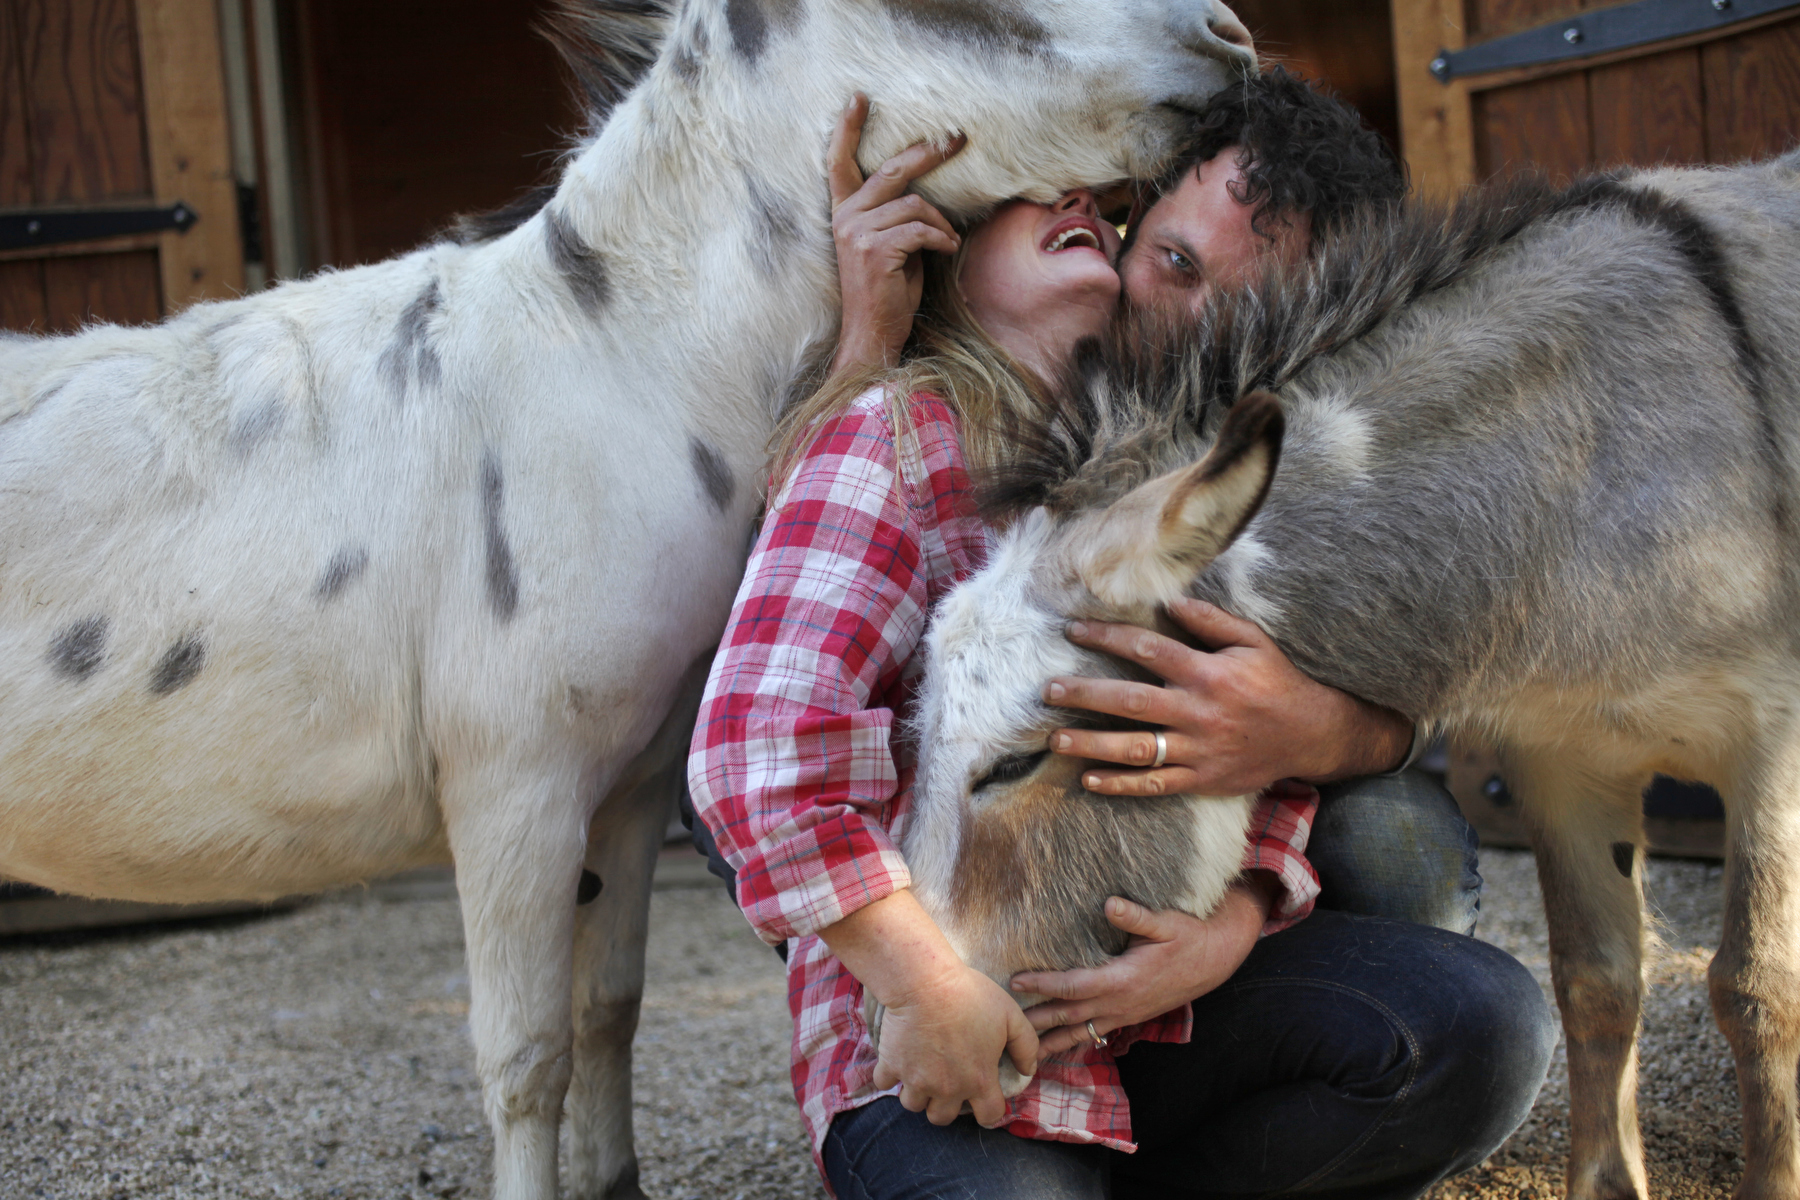 Heather Gillette, 44, and her husband Christopher Carstens, 34, pictured with miniature donkeys Large Marge, left, and Penelope May 22, 2014 in  front of their home in Woodside, Calif. The couple bought the land in 2006 and built the barn with horse stables with the intent of living in the upstairs space. Over the years, though, Heather took over the downstairs area. Sometimes animals from their land wander in and out of their home, including ducks, a chicken, three dogs, cats and the occasional horse.